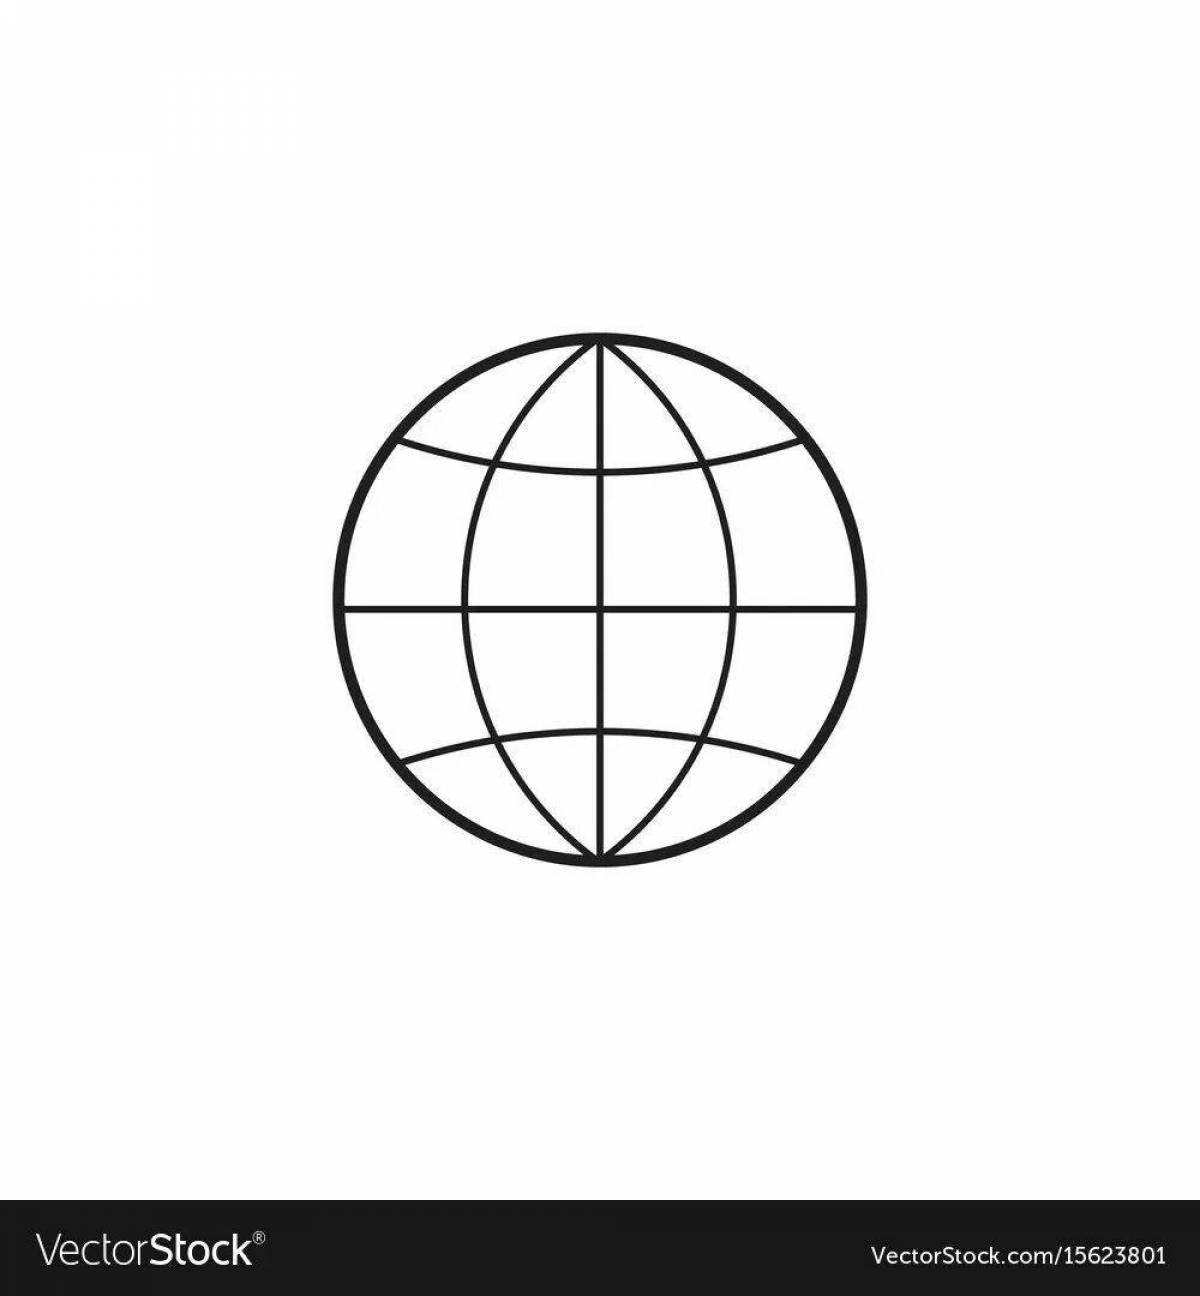 Charming equator coloring page